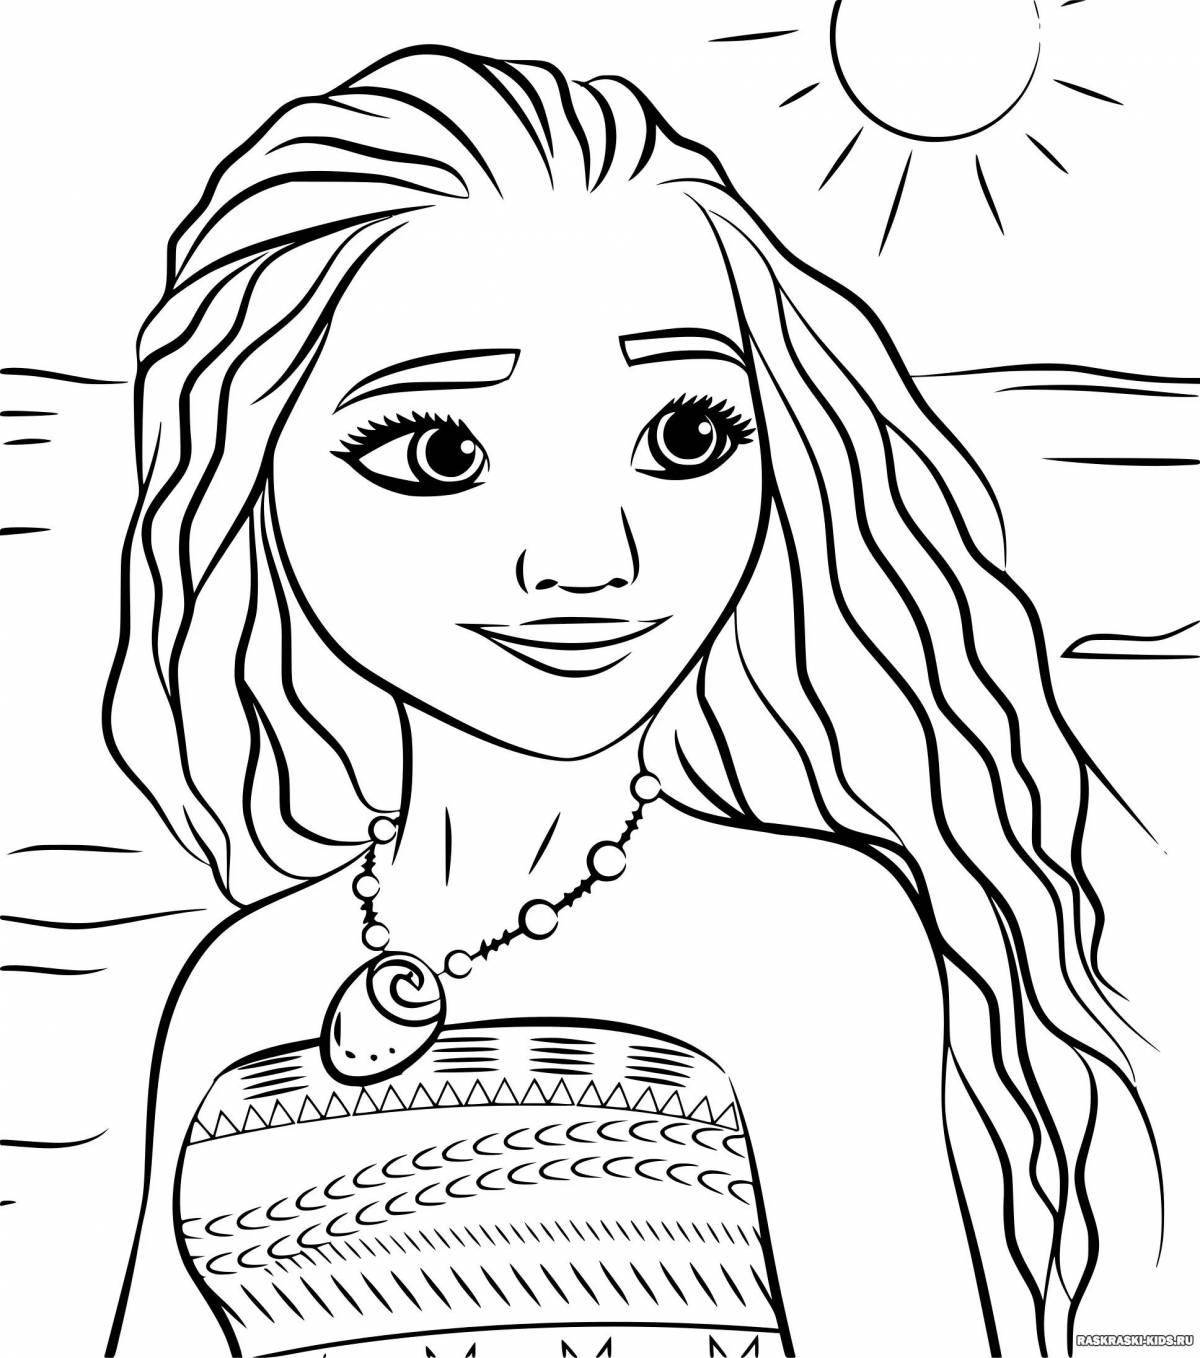 Beautiful shining coloring book for girls 11 years old